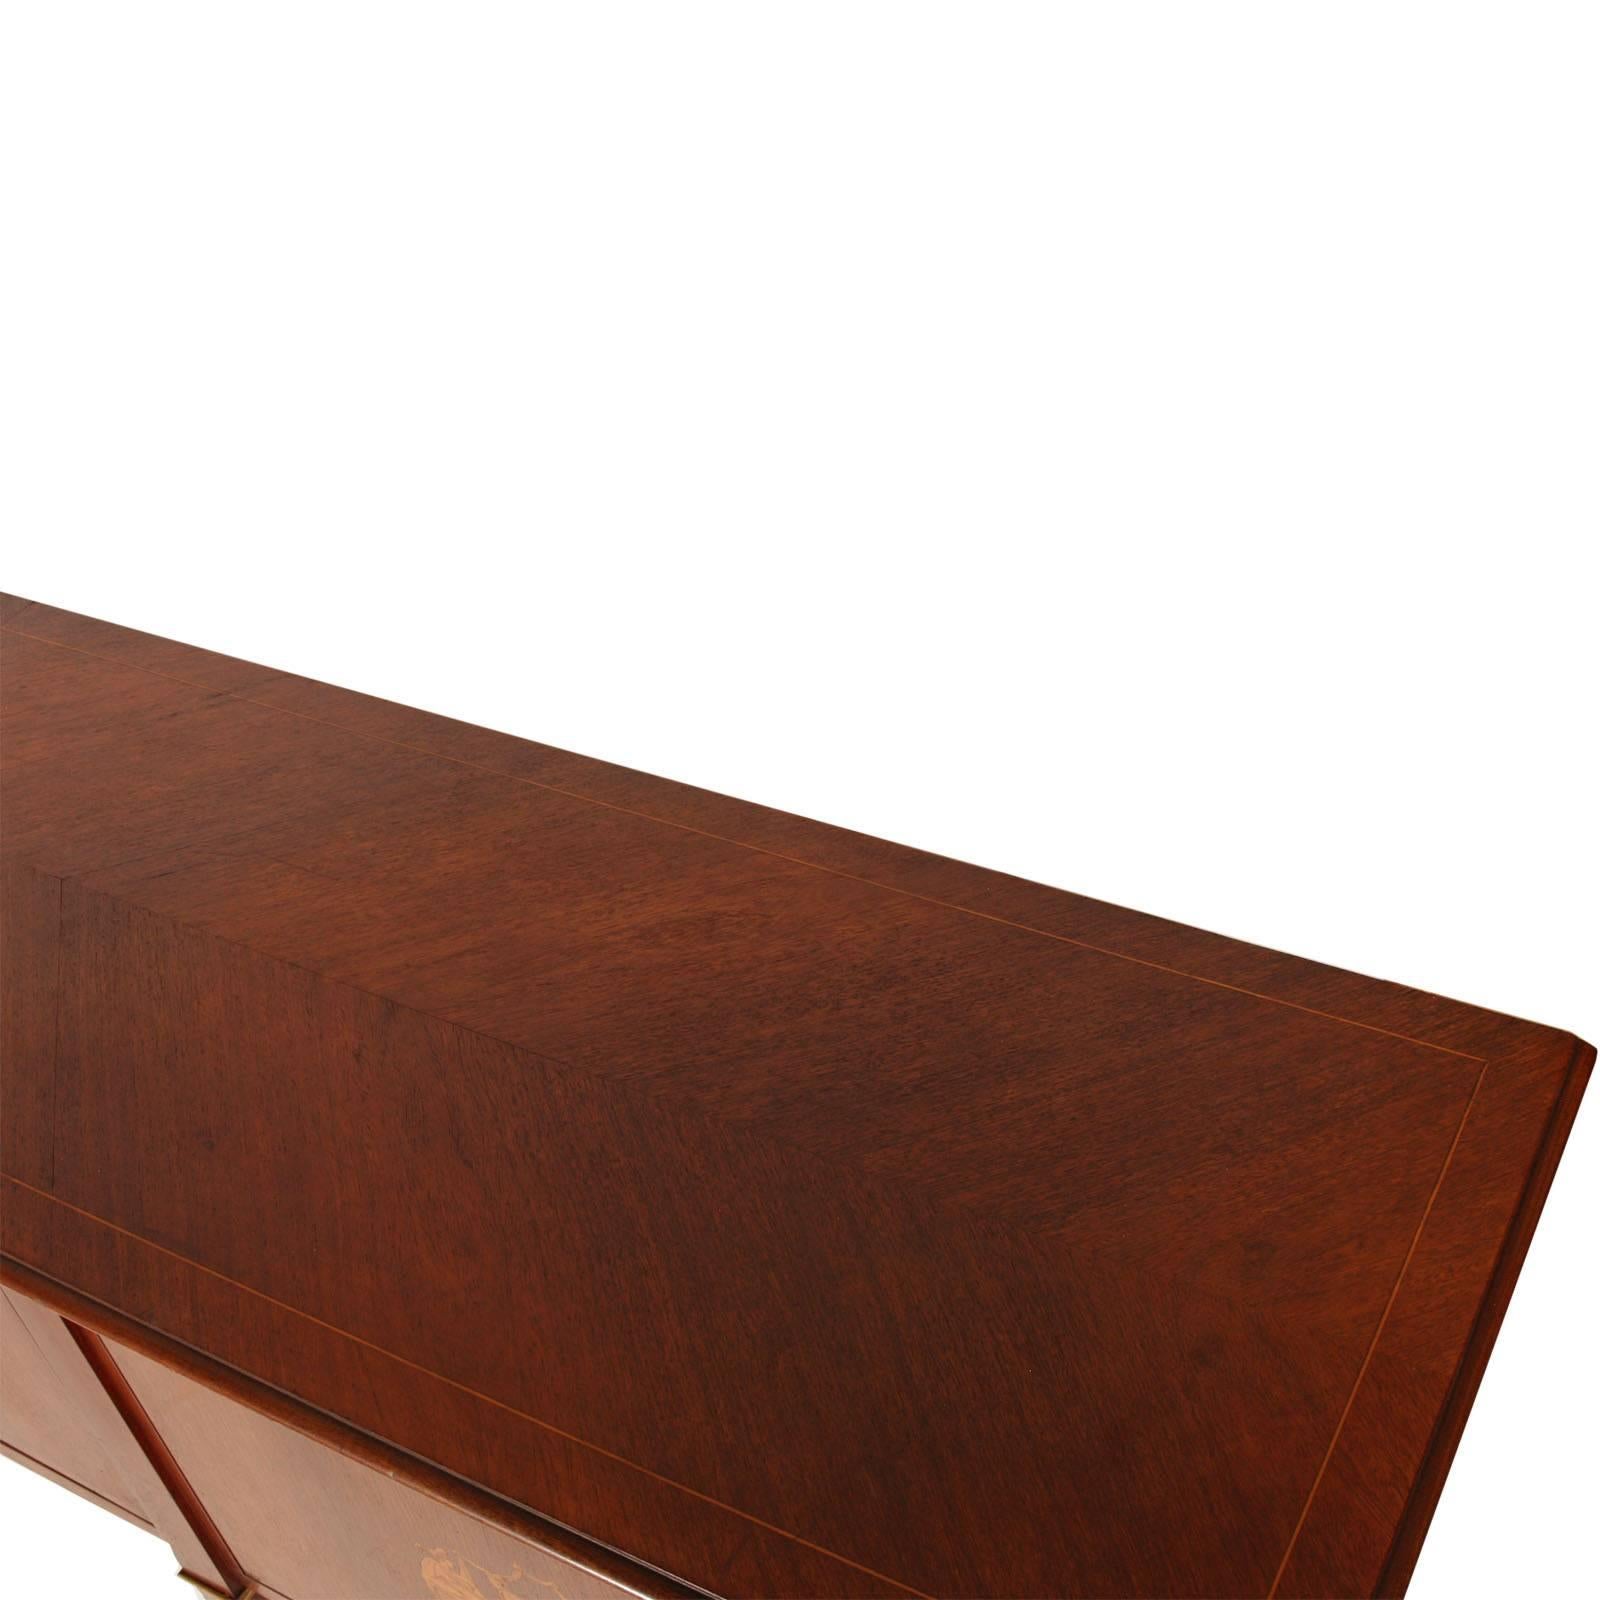 Gilt 1940s Credenza Paolo Buffa attributed, in Walnut, Mobili Cantù with Maple Inlaid